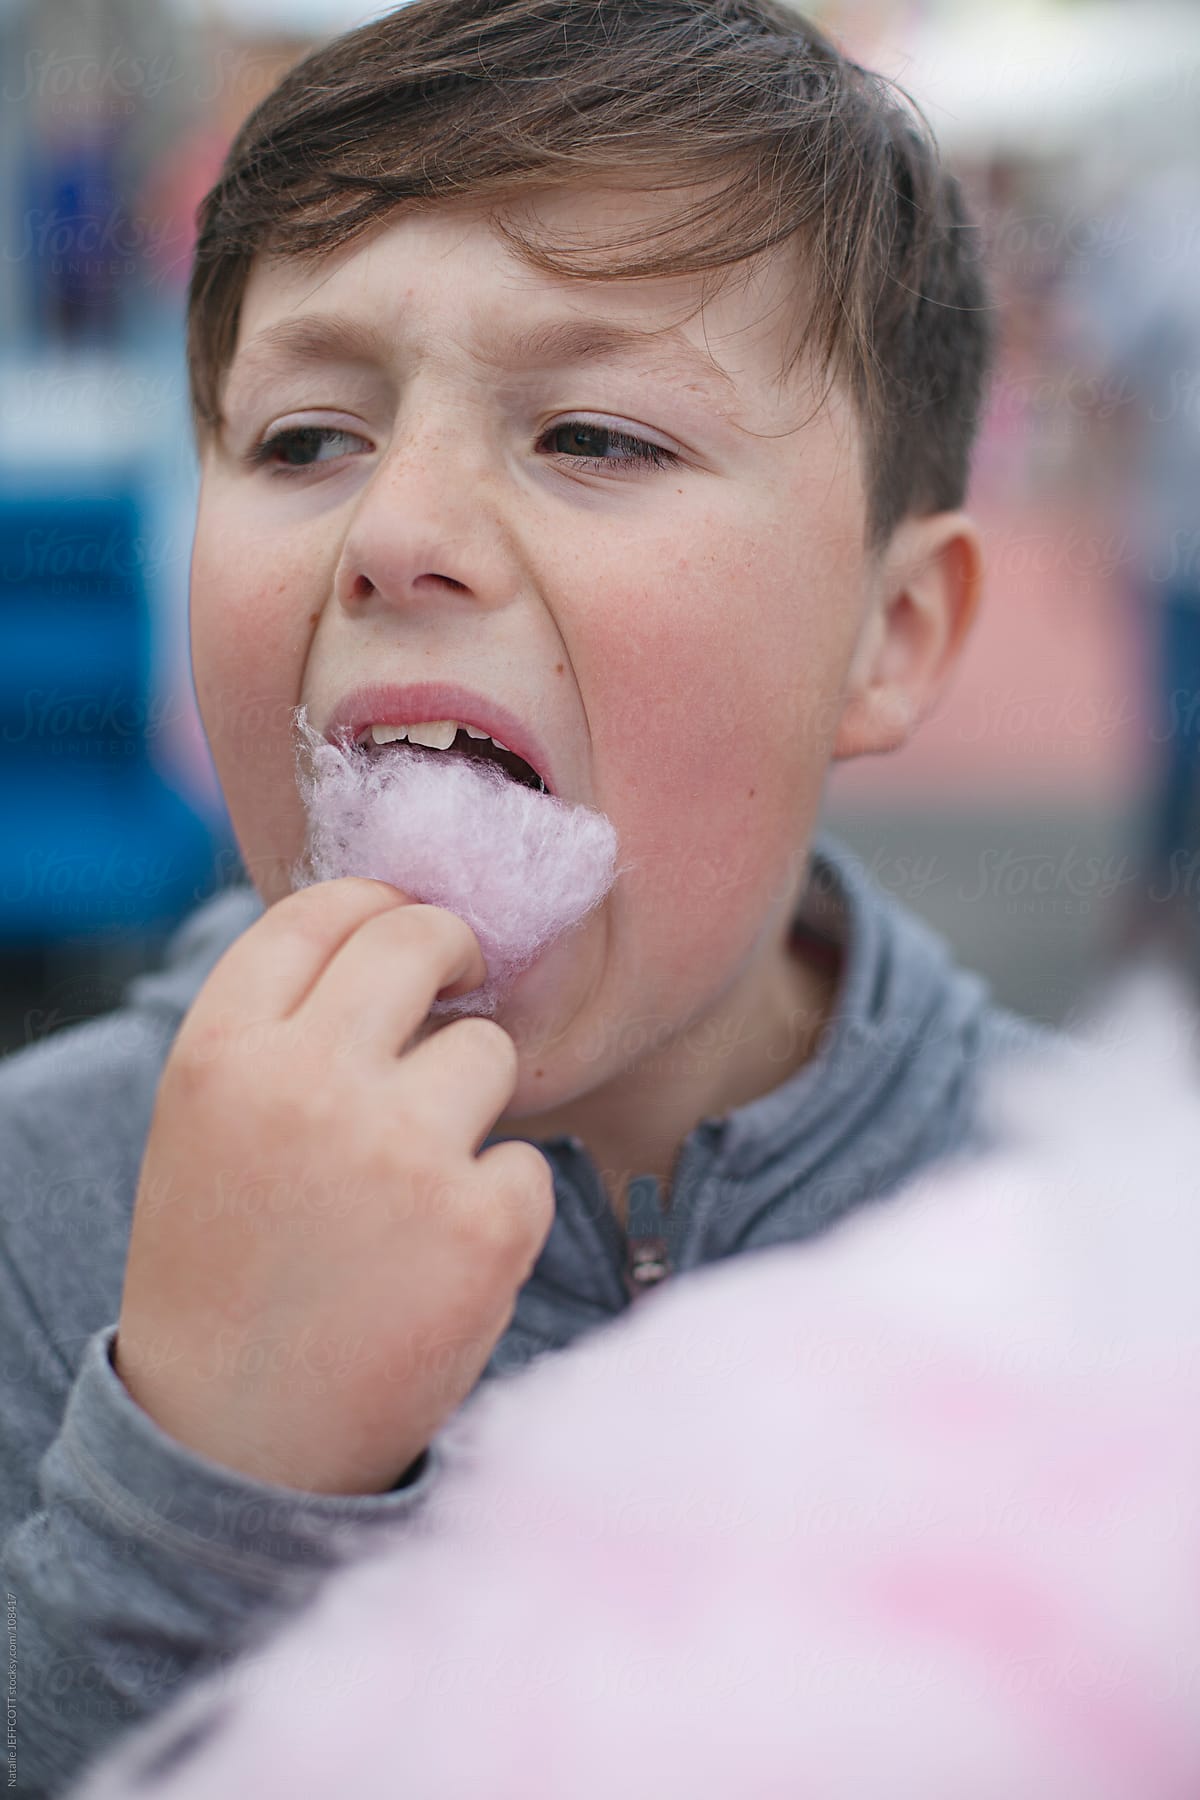 young boy eating candy floss at a fair